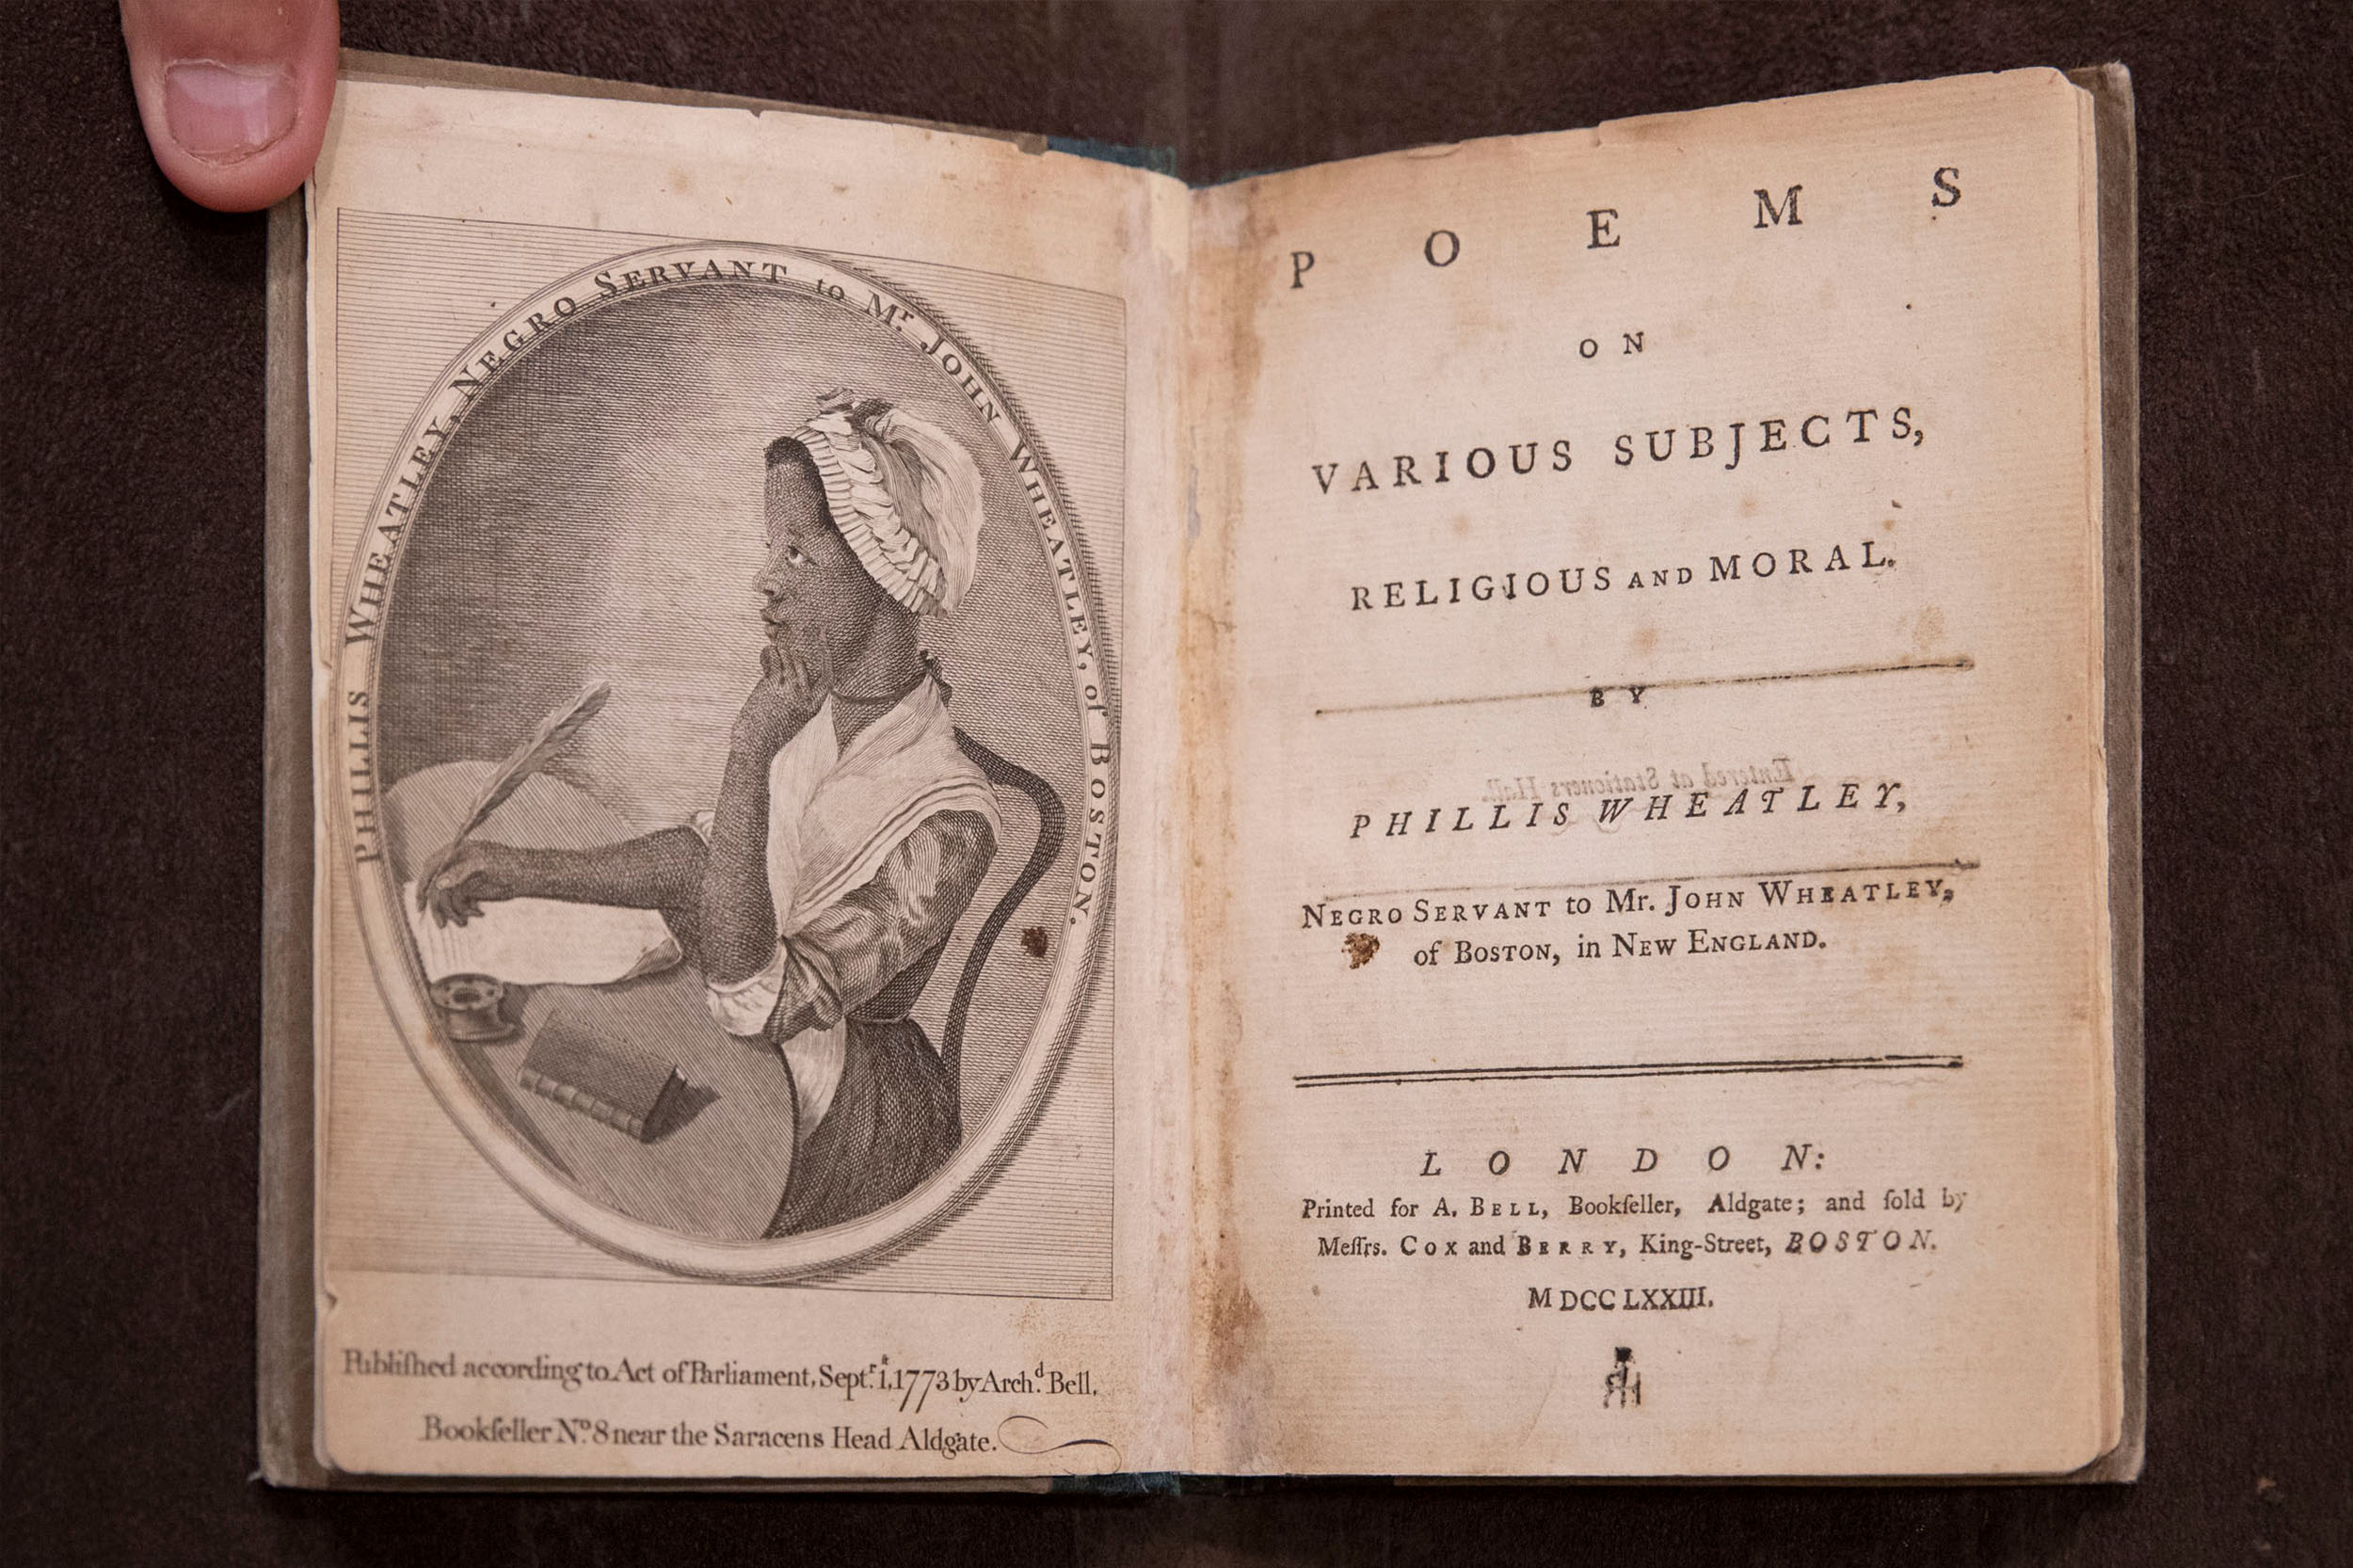 The opening pages of the a very old book.  Title page reads: Poems on various subjects, religious and moral Phillis Wheatley